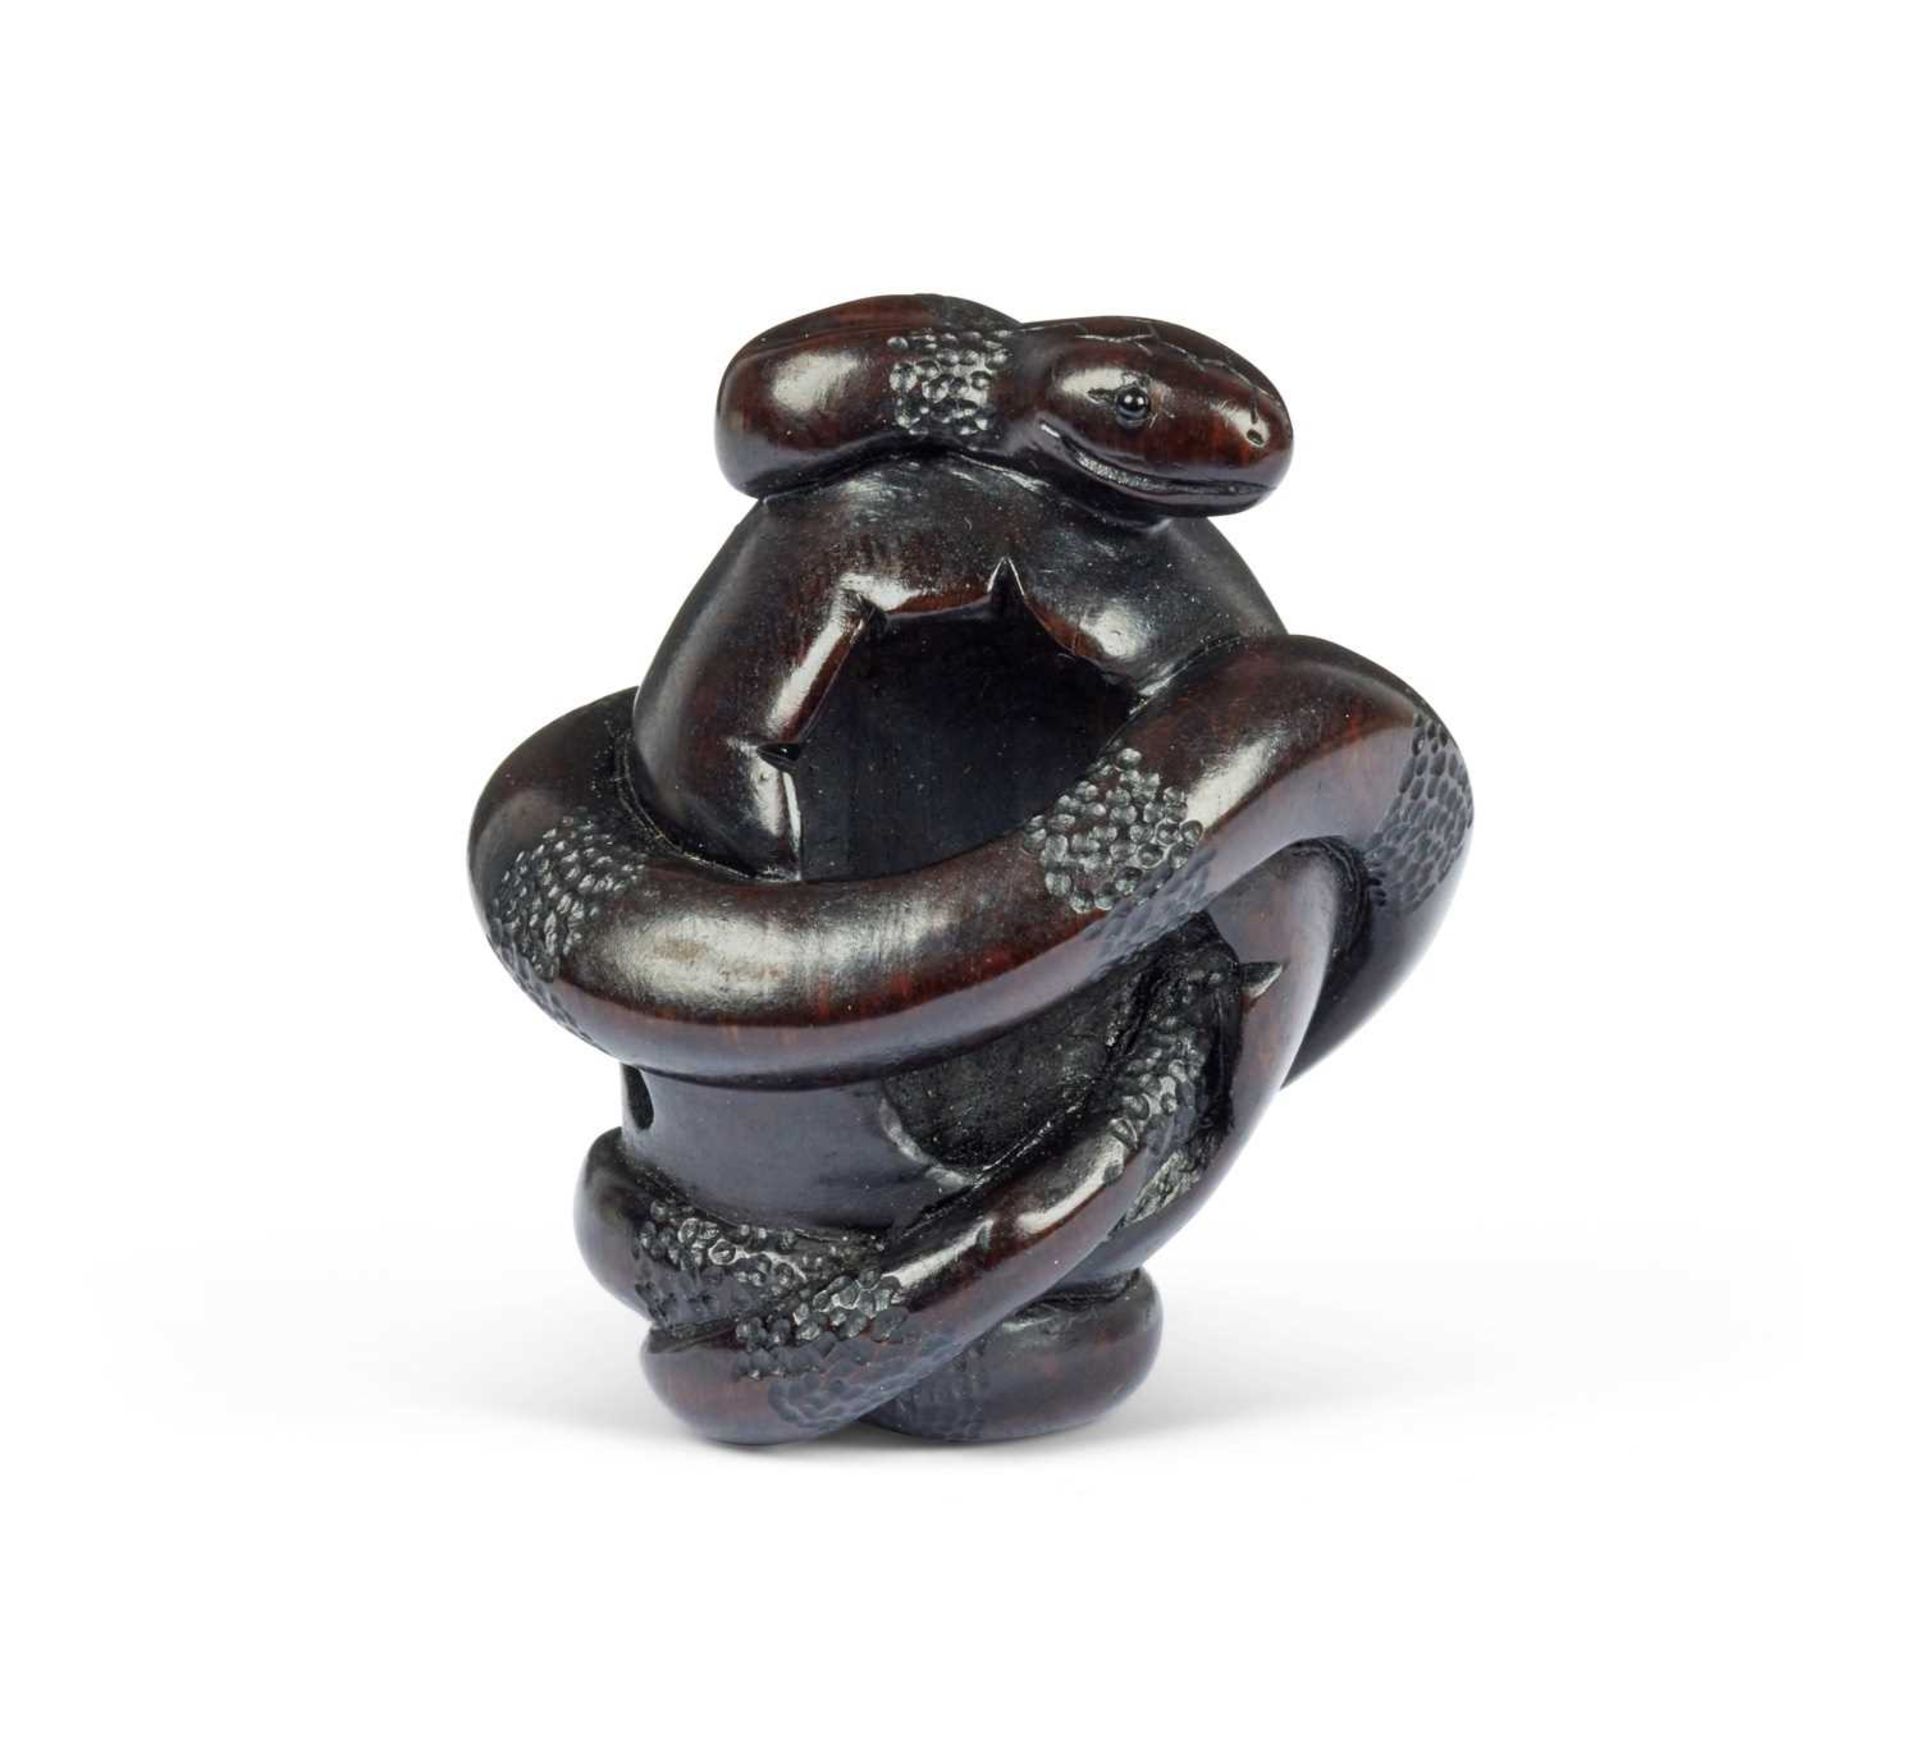 A CARVED WOOD NETSUKE IN THE FORM OF A SNAKE